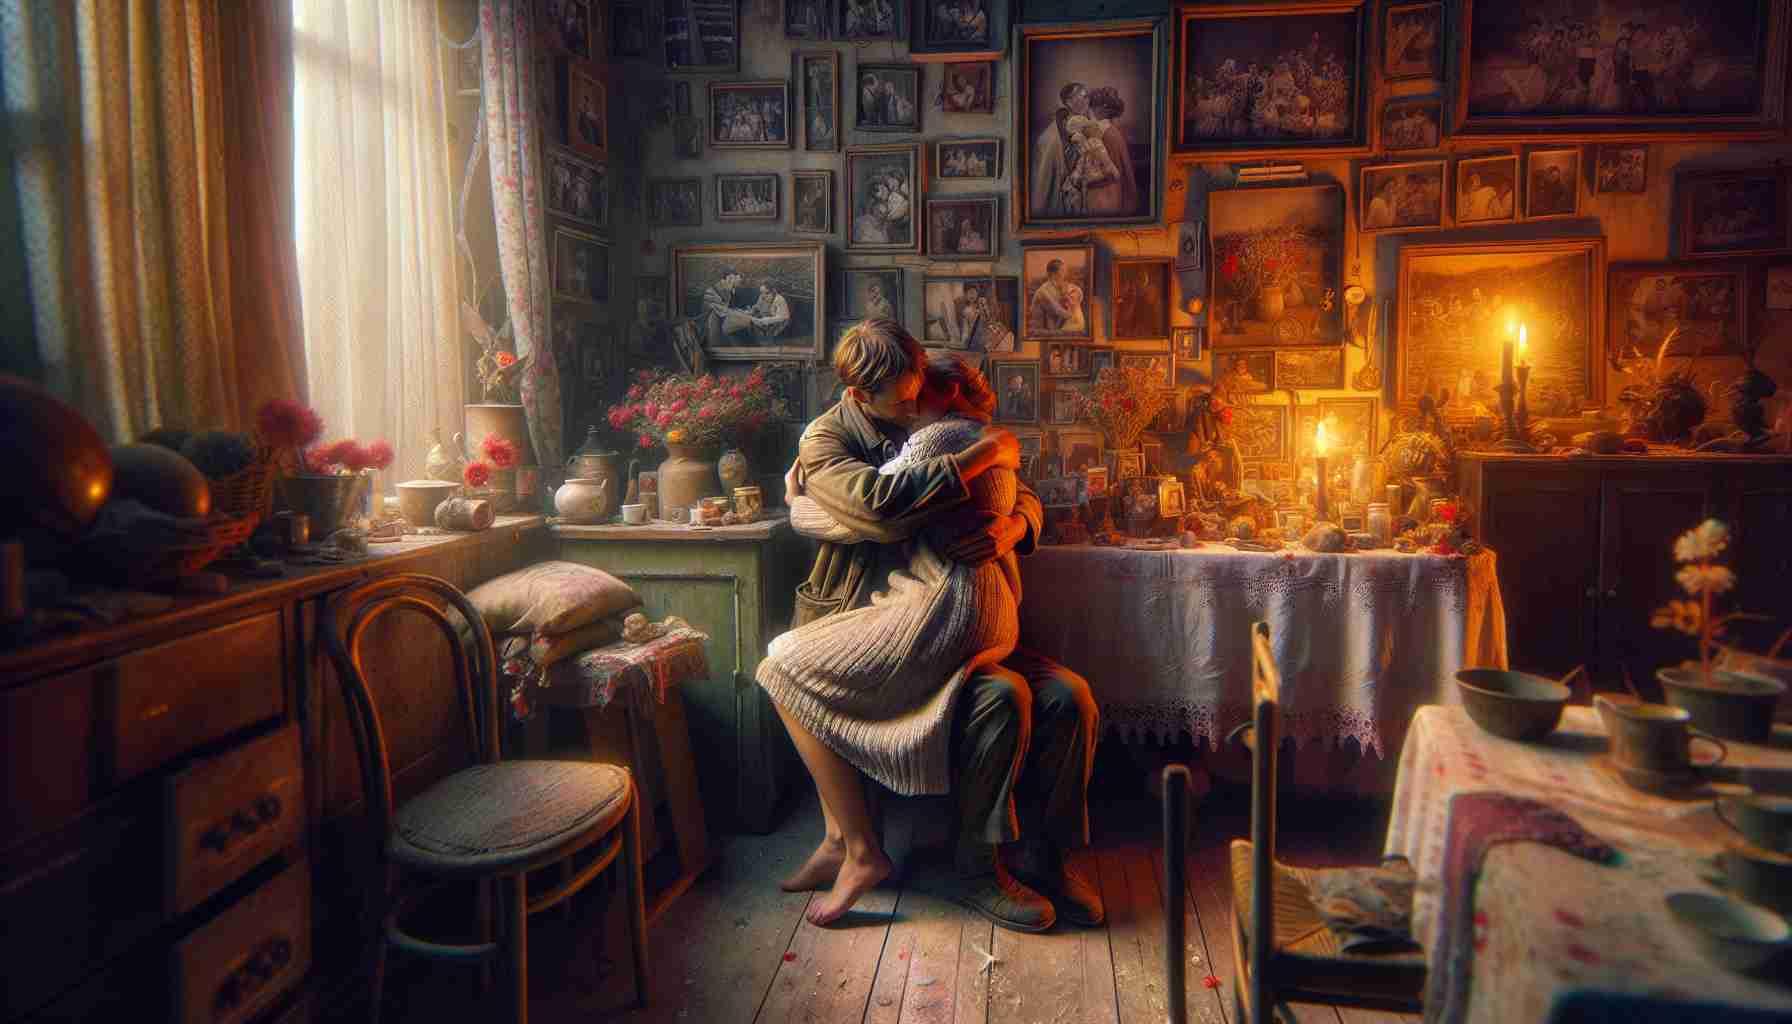 An original, high definition image depicting an intimate moment of love, expressed through conventional photographs celebrations. The scene captures two individuals in a heartfelt embrace, symbolizing mutual affection and understanding. The background features elements and decorations typically associated with photo celebrations, providing a warm and authentic atmosphere filled with nostalgia and joy. The portrayal of the event should be realistic, with attention to detail and a strong emphasis on emotion and human connection.